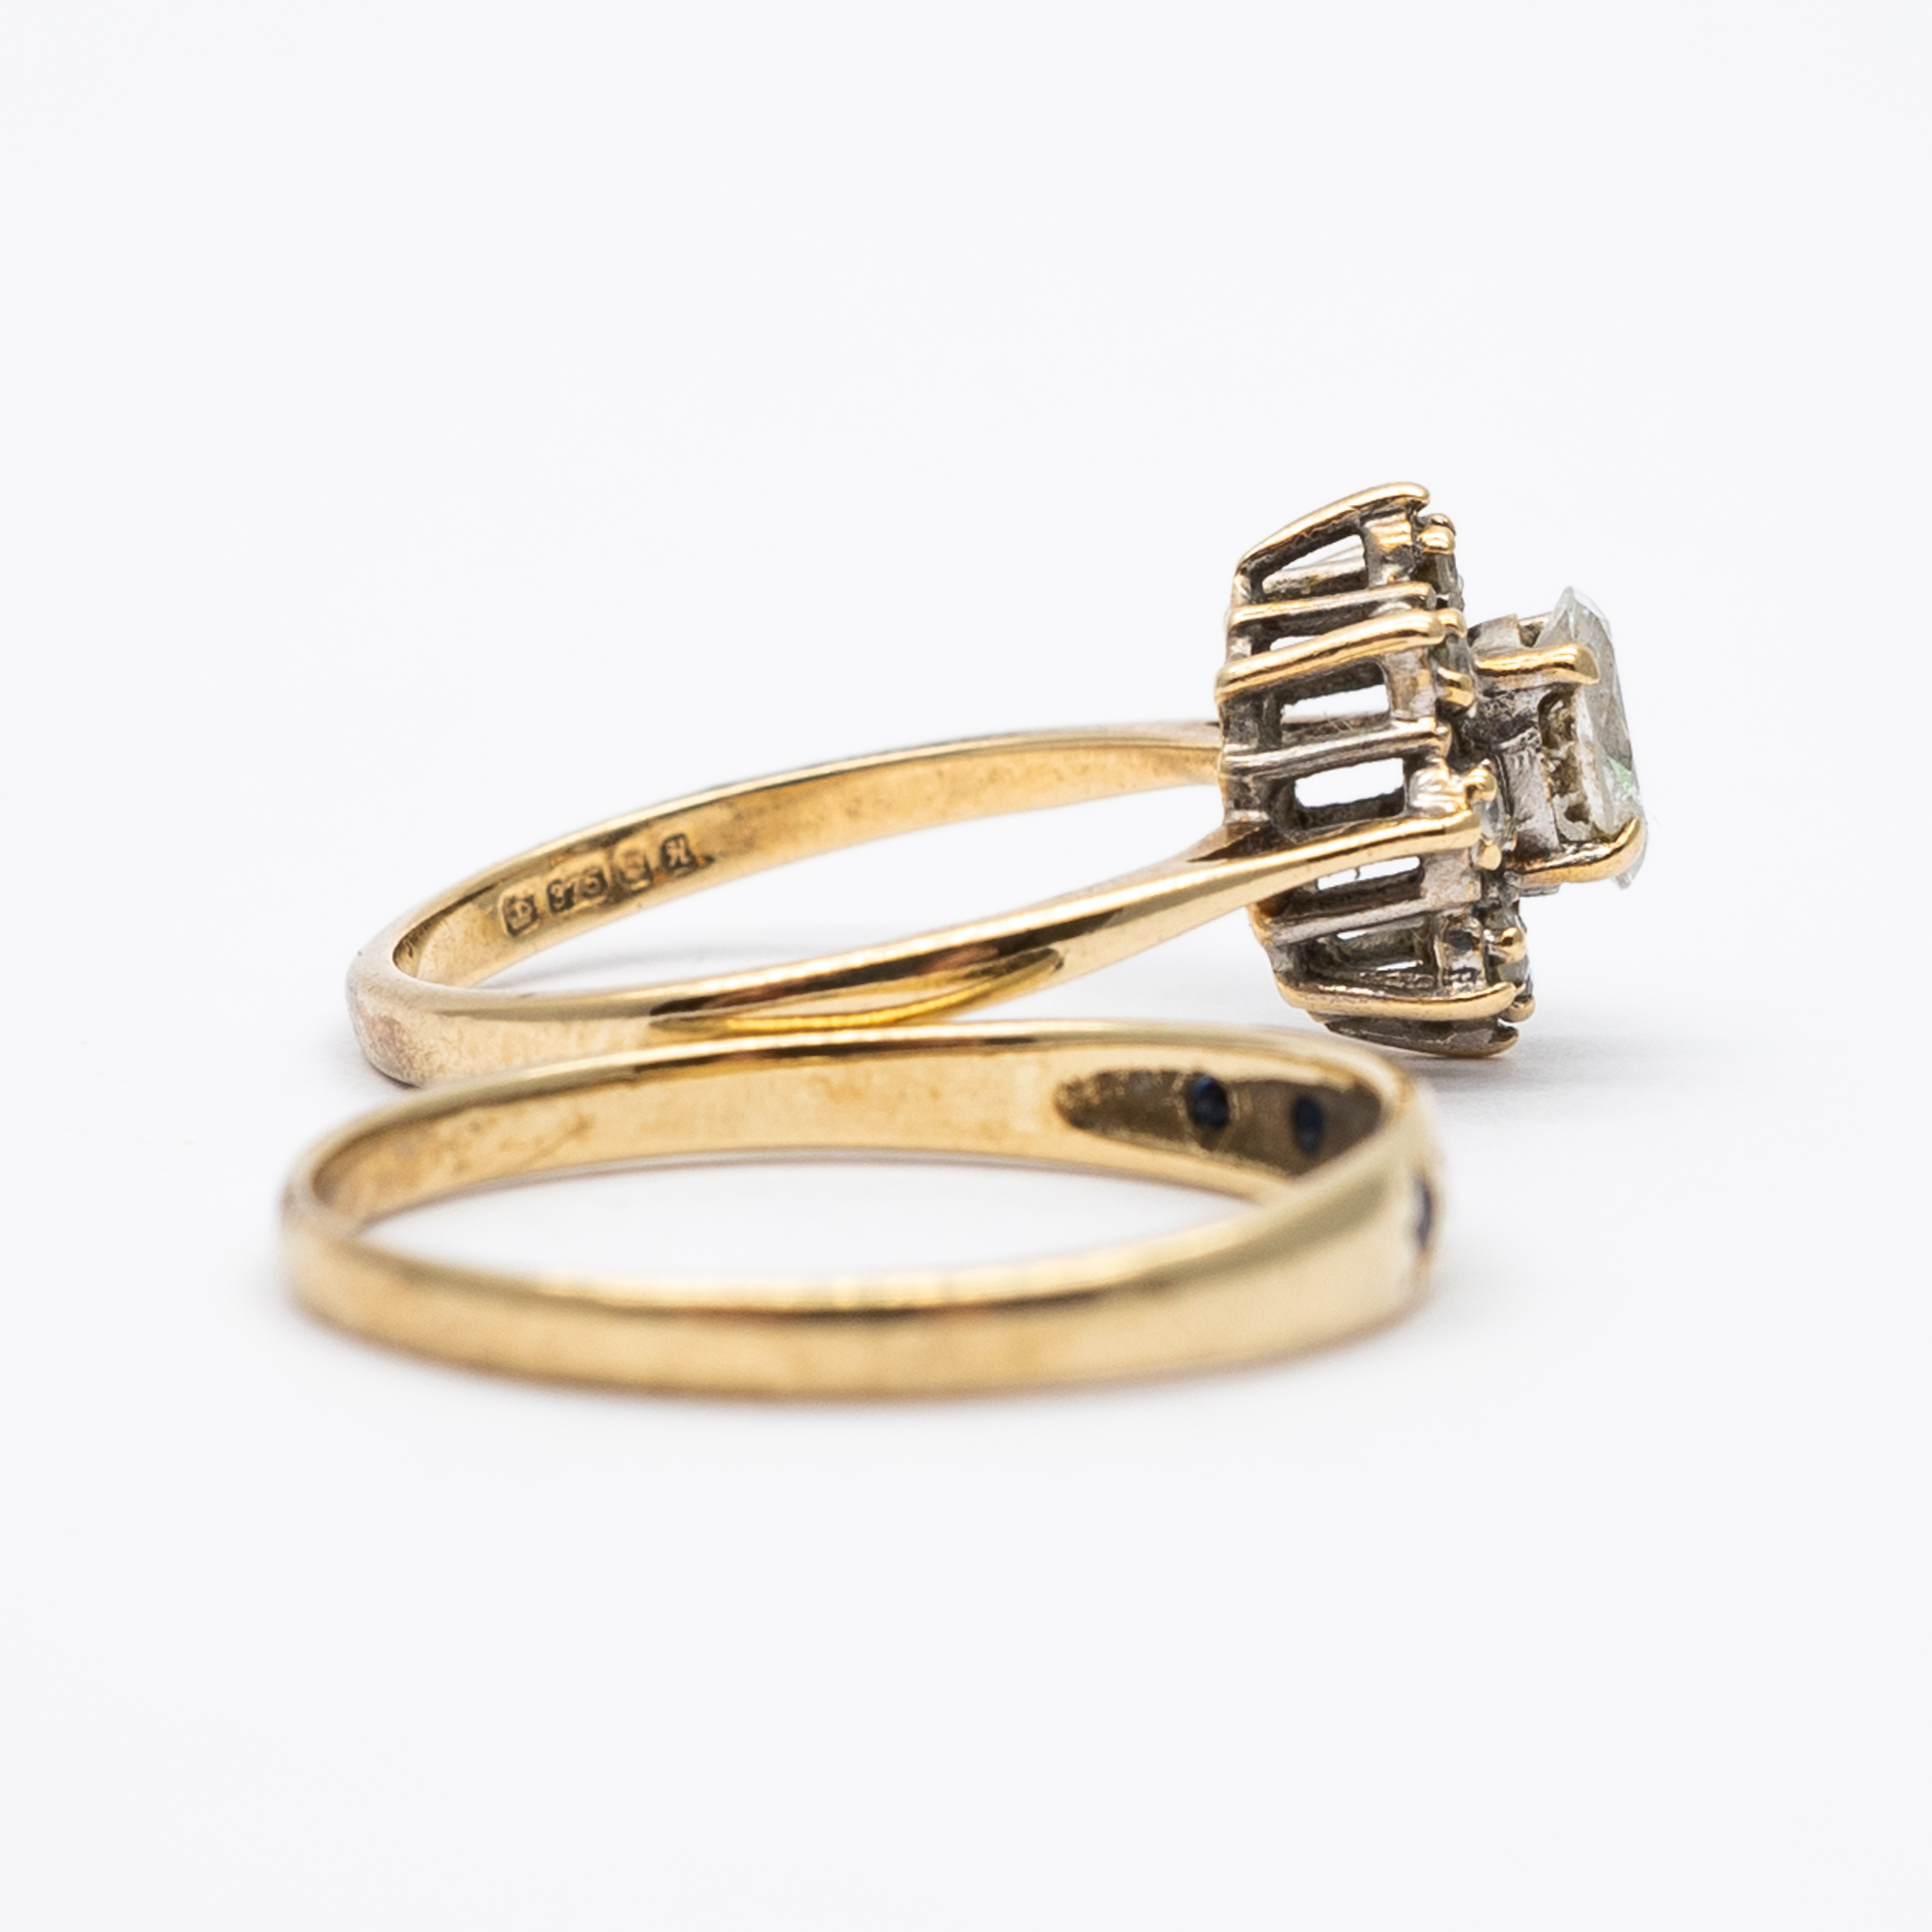 2x 9ct yellow gold rings - Image 2 of 5